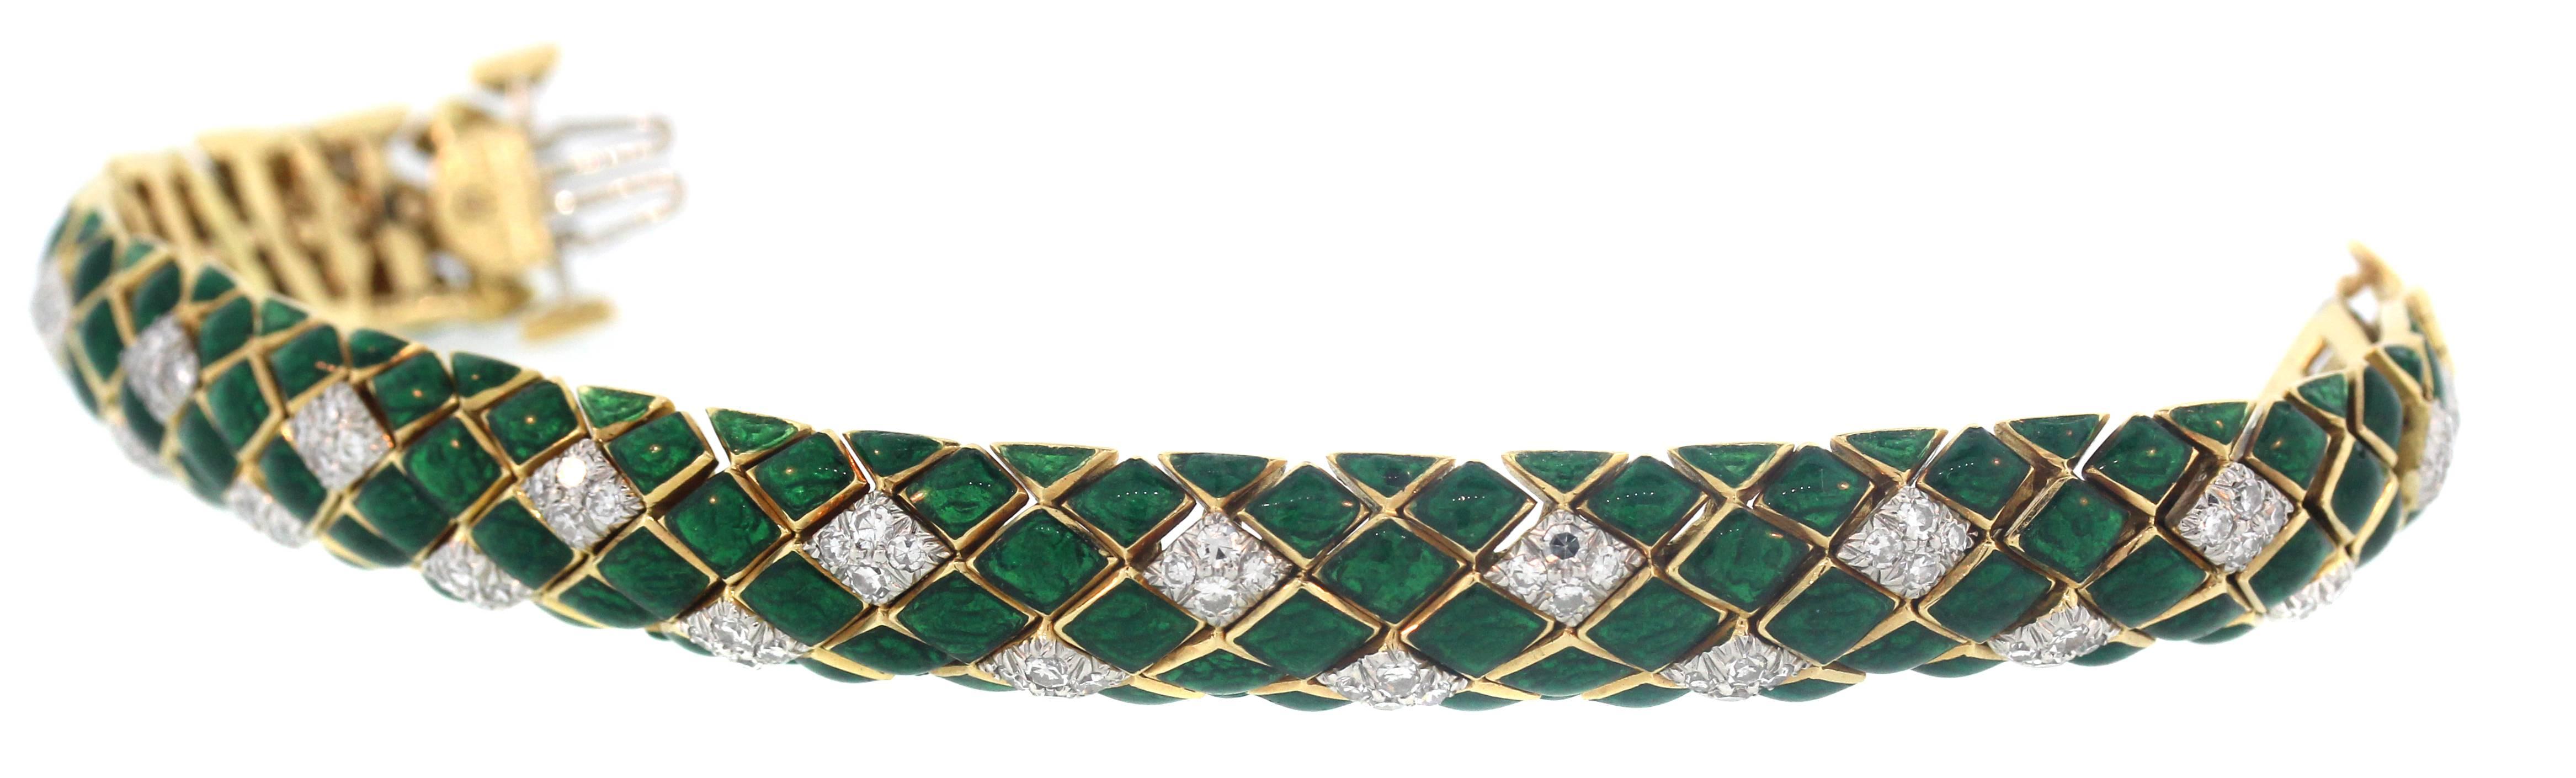 IF YOU ARE REALLY INTERESTED, CONTACT US WITH ANY REASONABLE OFFER. WE WILL TRY OUR BEST TO MAKE YOU HAPPY!

David Webb Green Enamel Diamond Gold Snake Bracelet set 

Bracelets are done in 18K Gold and Green Enamel

A set of two David Webb snake